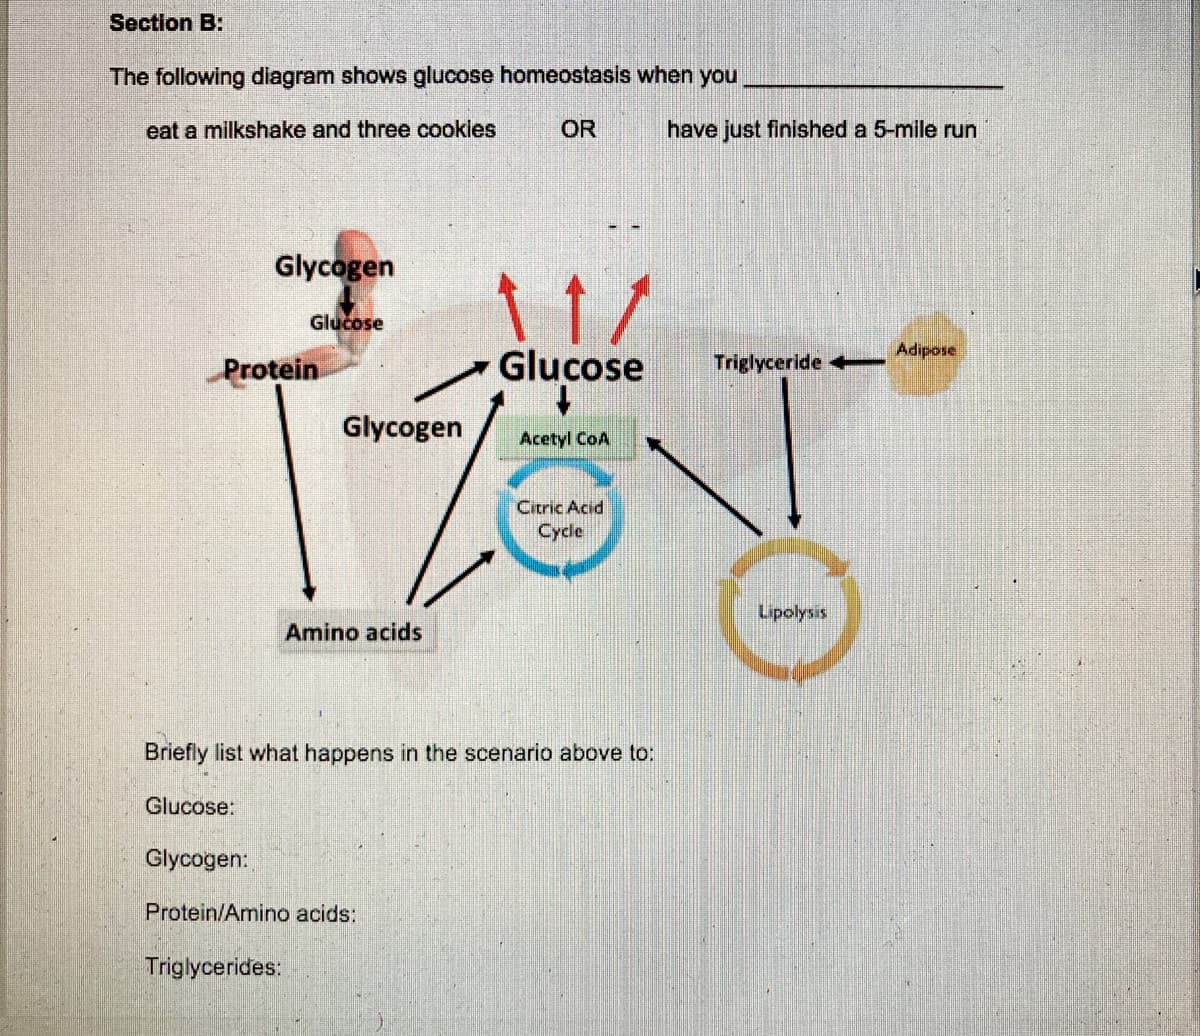 Section B:
The following diagram shows glucose homeostasis when you
eat a milkshake and three cookies
OR
have just finished a 5-mile run
Glycogen
Glucose
Adipose
Protein
Glucose
Triglyceride
Glycogen
Acetyl CoA
Citric Acid
Cycle
Lipolysis
Amino acids
Briefly list what happens in the scenario above to:
Glucose:
Glycogen:
Protein/Amino acids:
Triglycerides:
